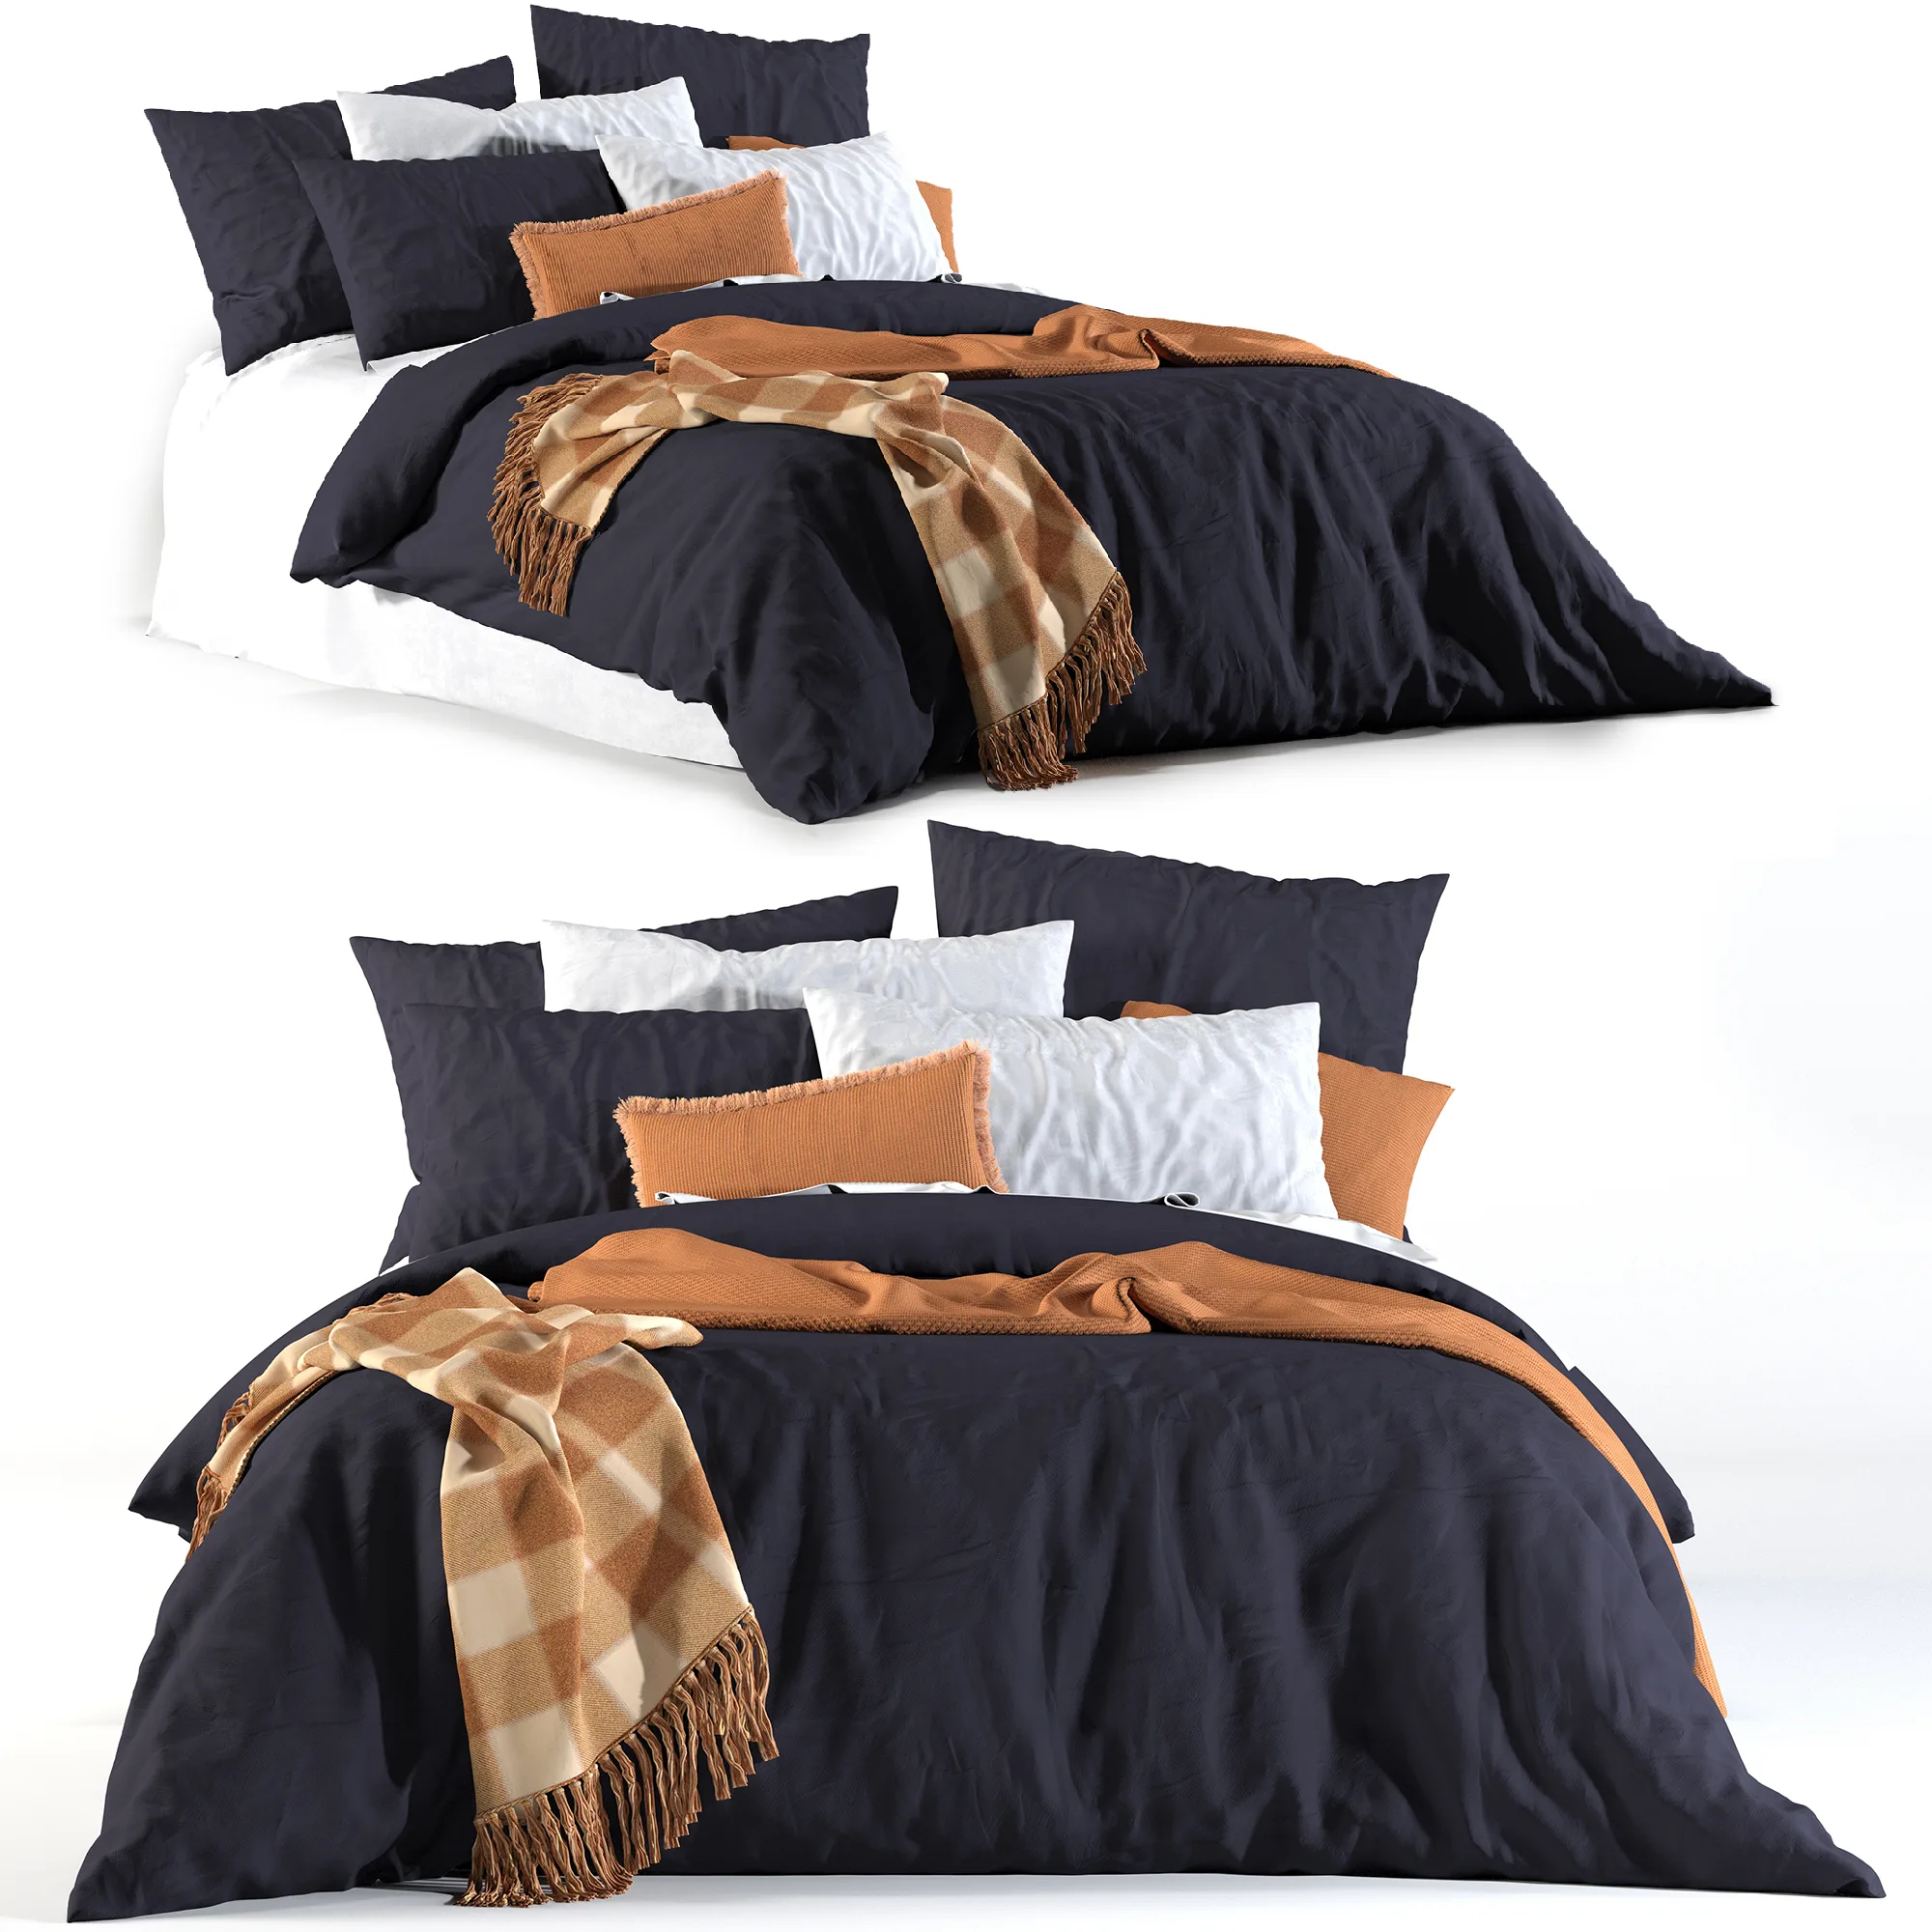 Adairs Bed #5 with Charcoal Quilt Cover Set